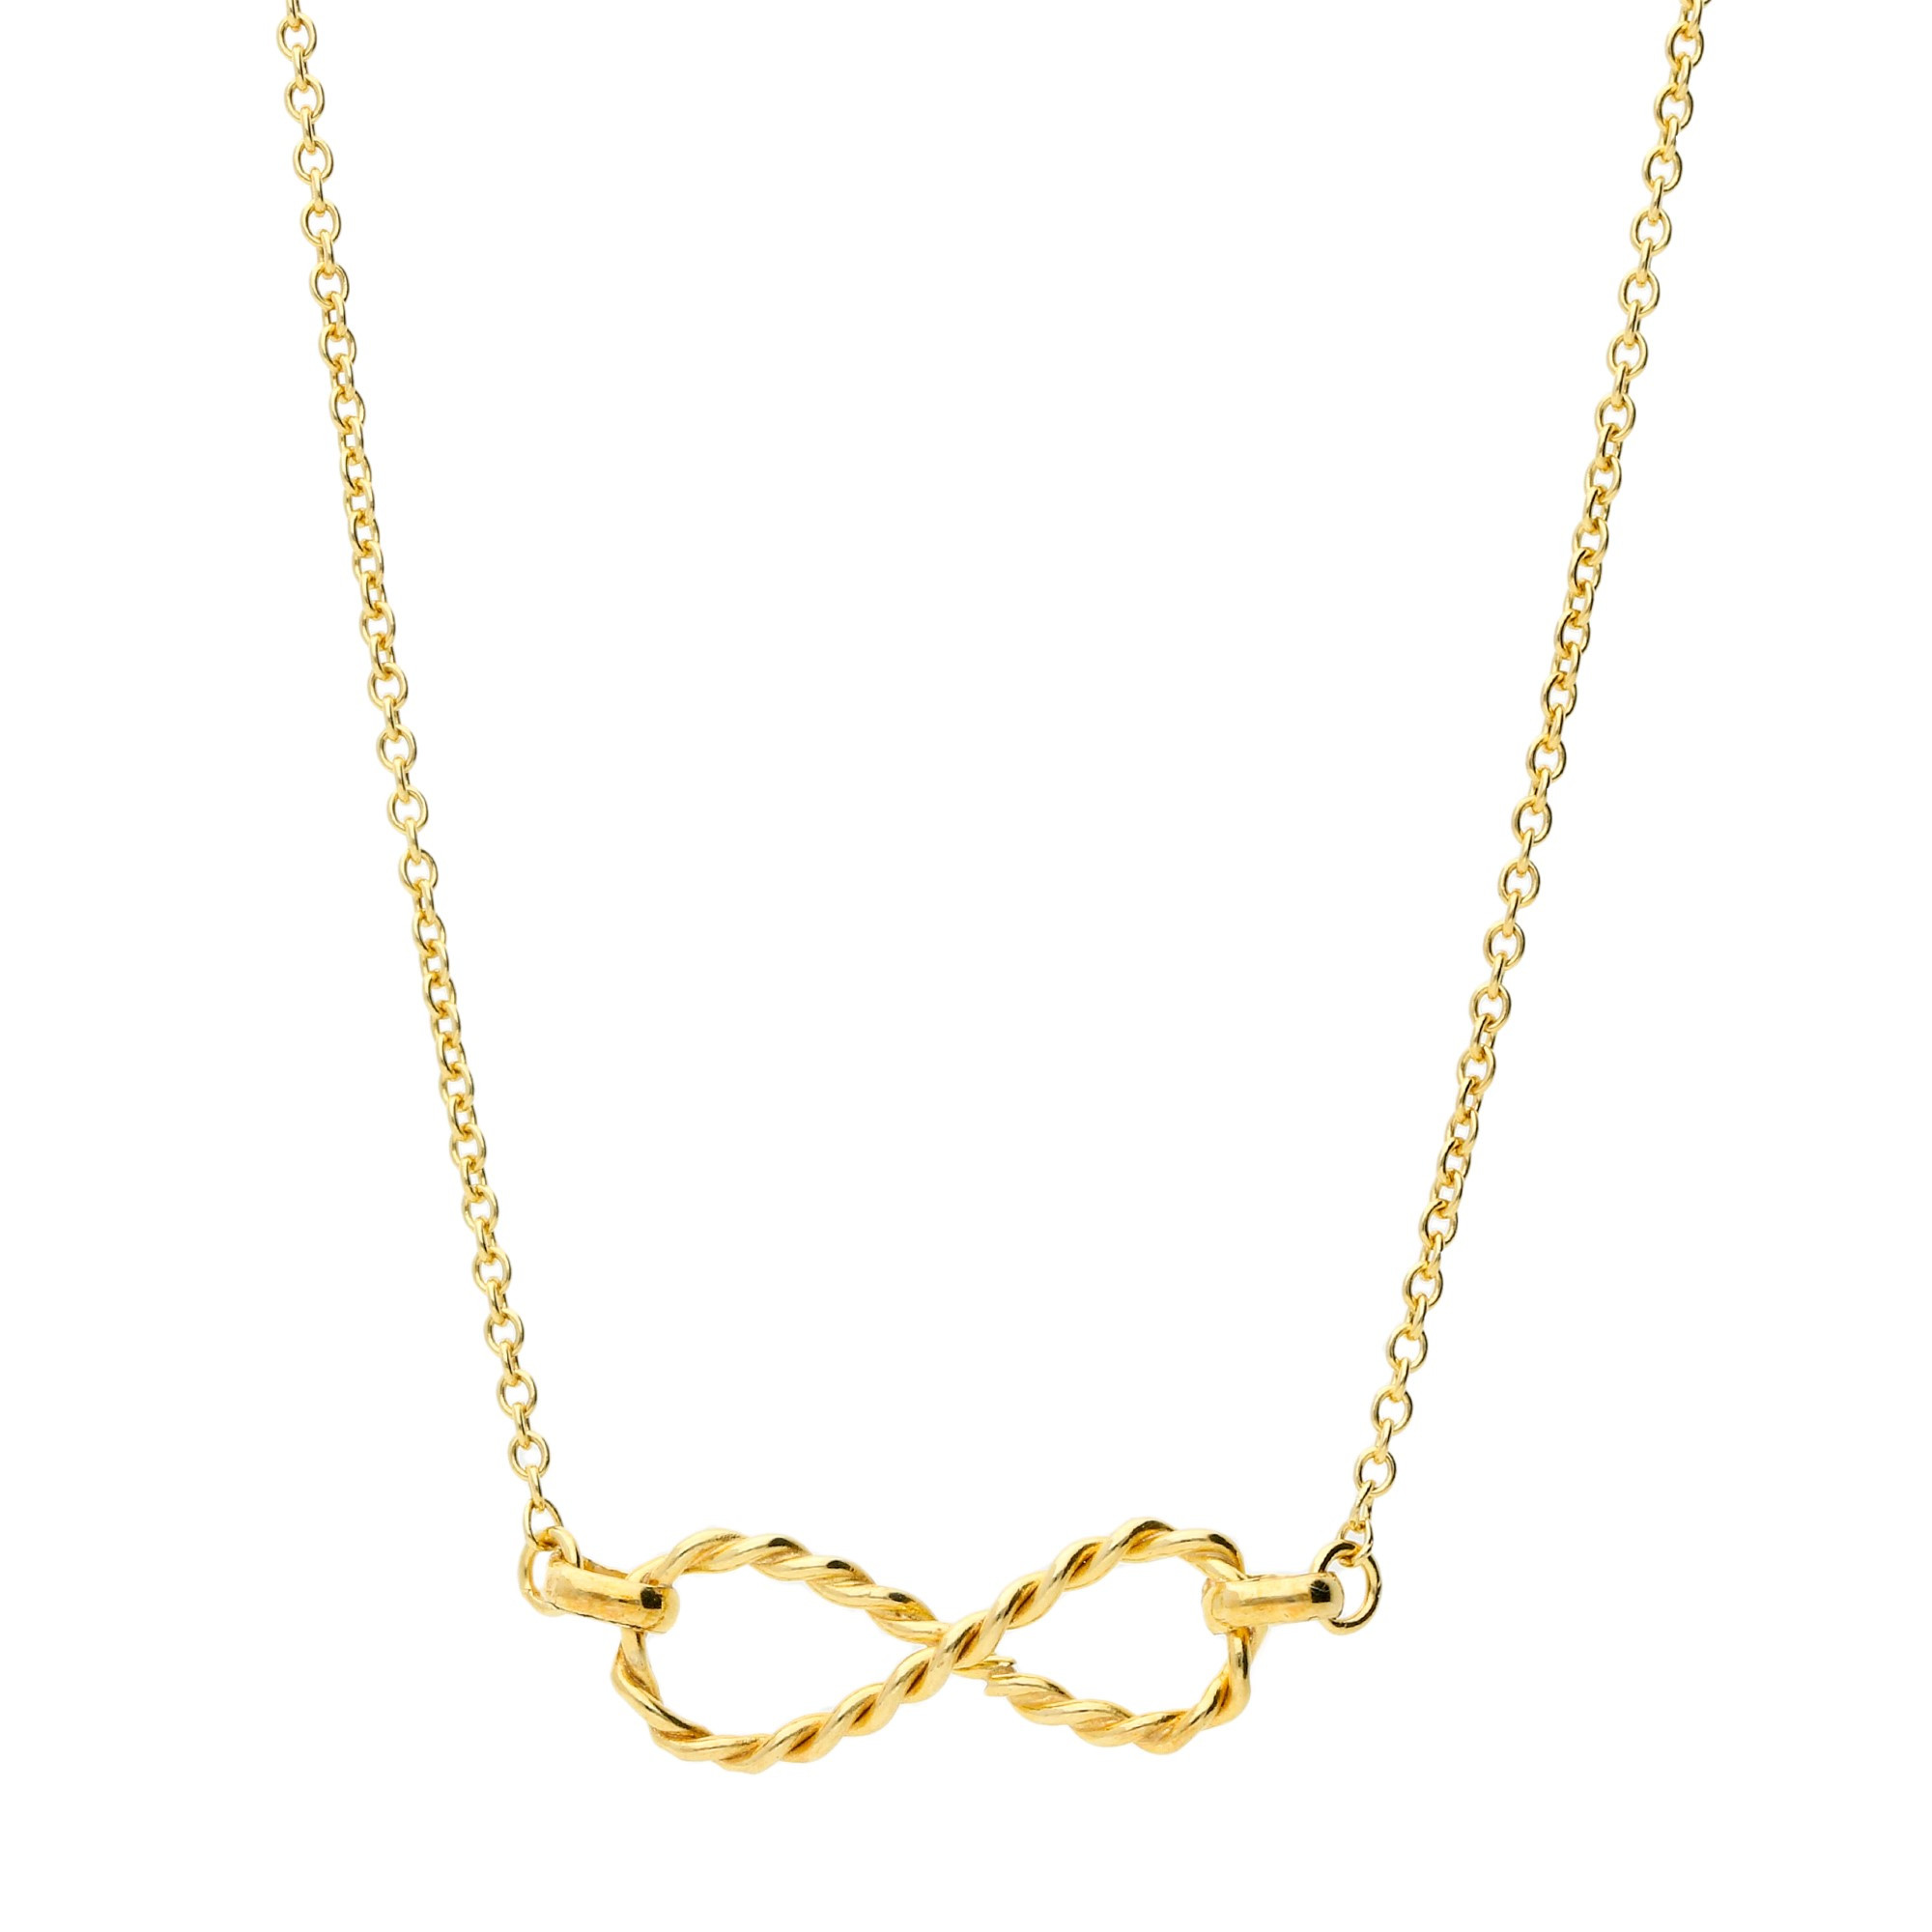 9ct Yellow Gold Infinity Necklace | Buy Online | Free Insured UK Delivery